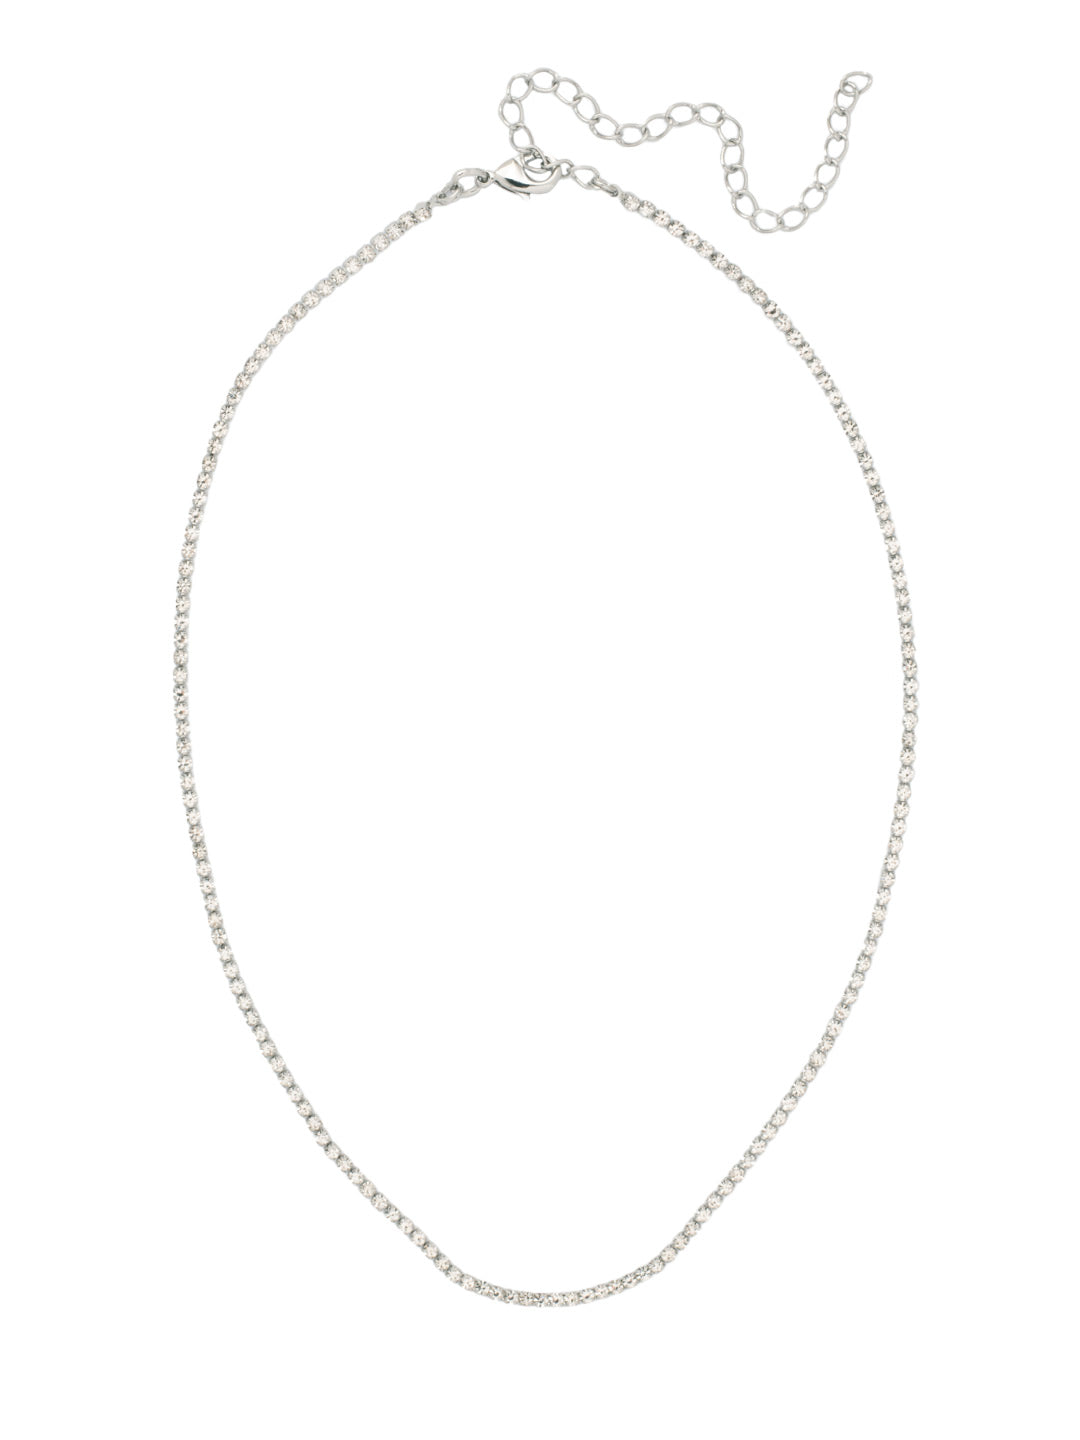 Mini Marnie Tennis Necklace - NFL2PDCRY - <p>The Mini Marnie Tennie Necklace features a dainty rhinestone chain, adjustable and secured with a lobster claw clasp. From Sorrelli's Crystal collection in our Palladium finish.</p>